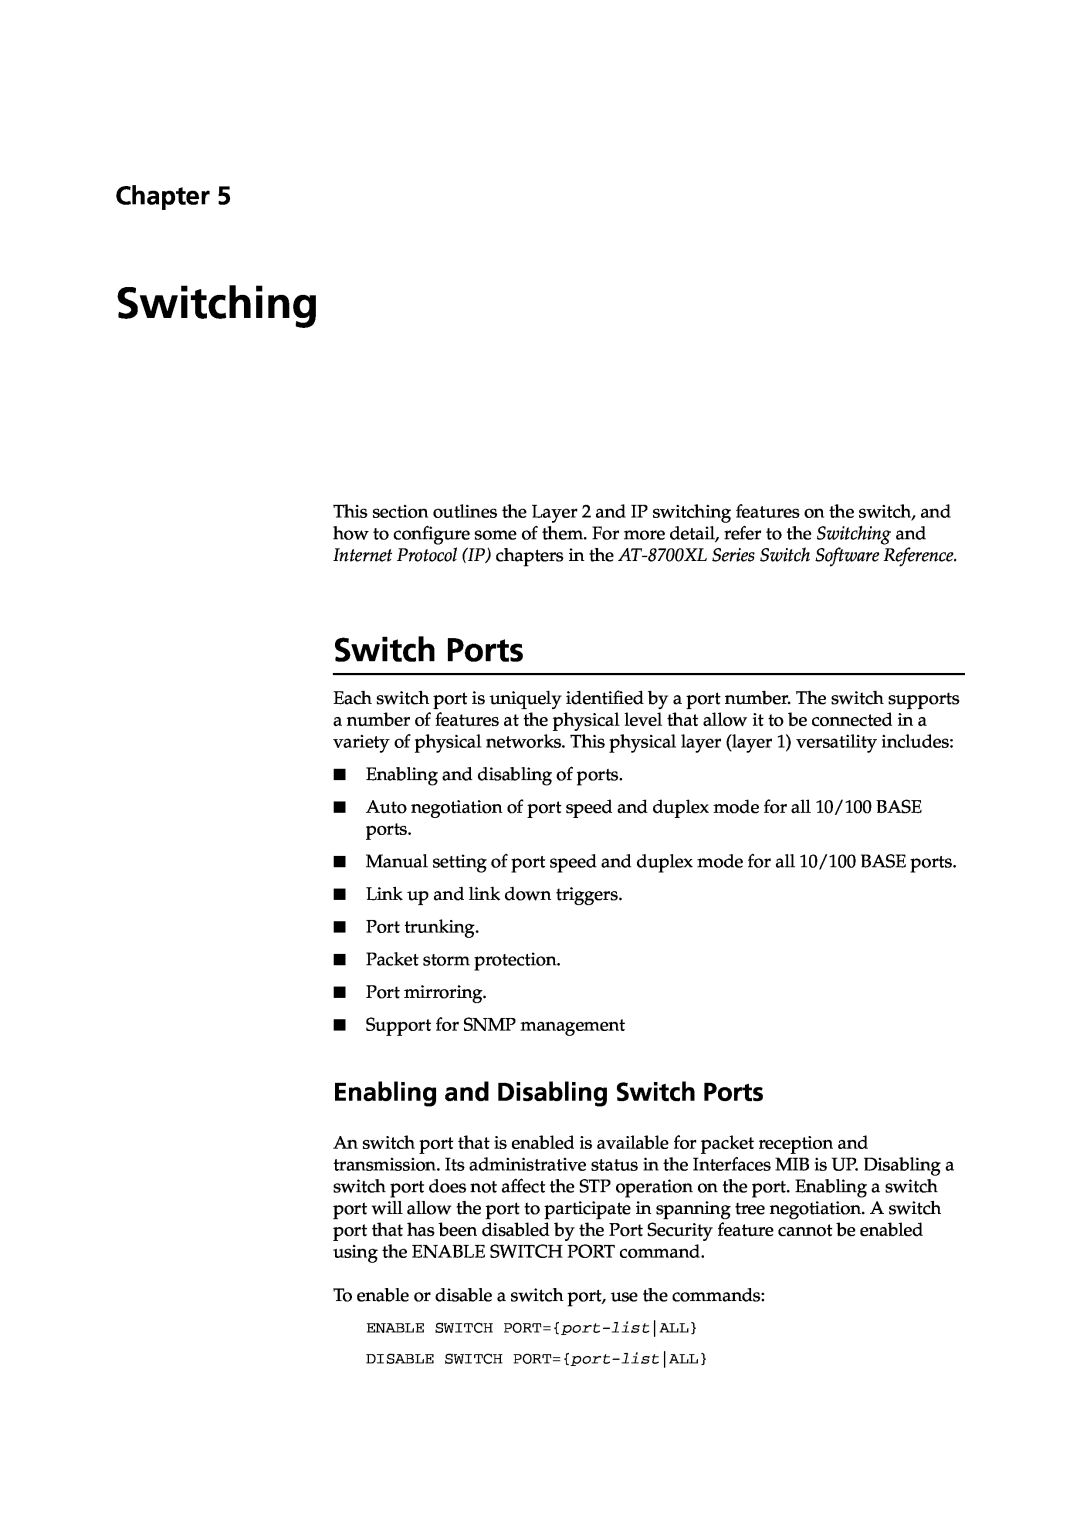 Allied Telesis at-8700xl series switch manual Switching, Enabling and Disabling Switch Ports, Chapter 